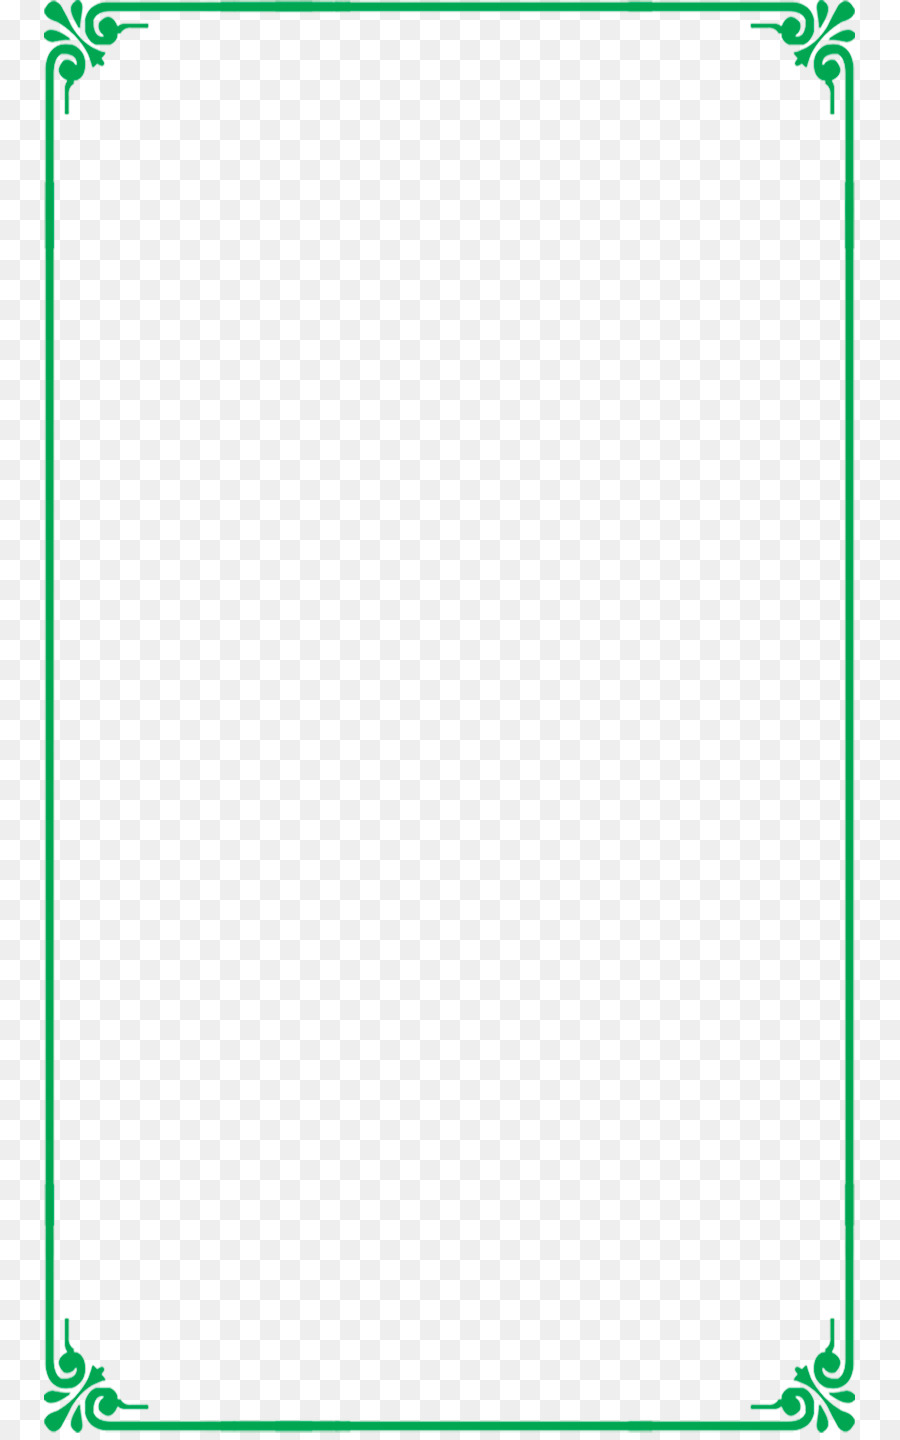 Picture frame - Green clear pattern border frame png download - 811*1433 - Free Transparent Picture Frame png Download.